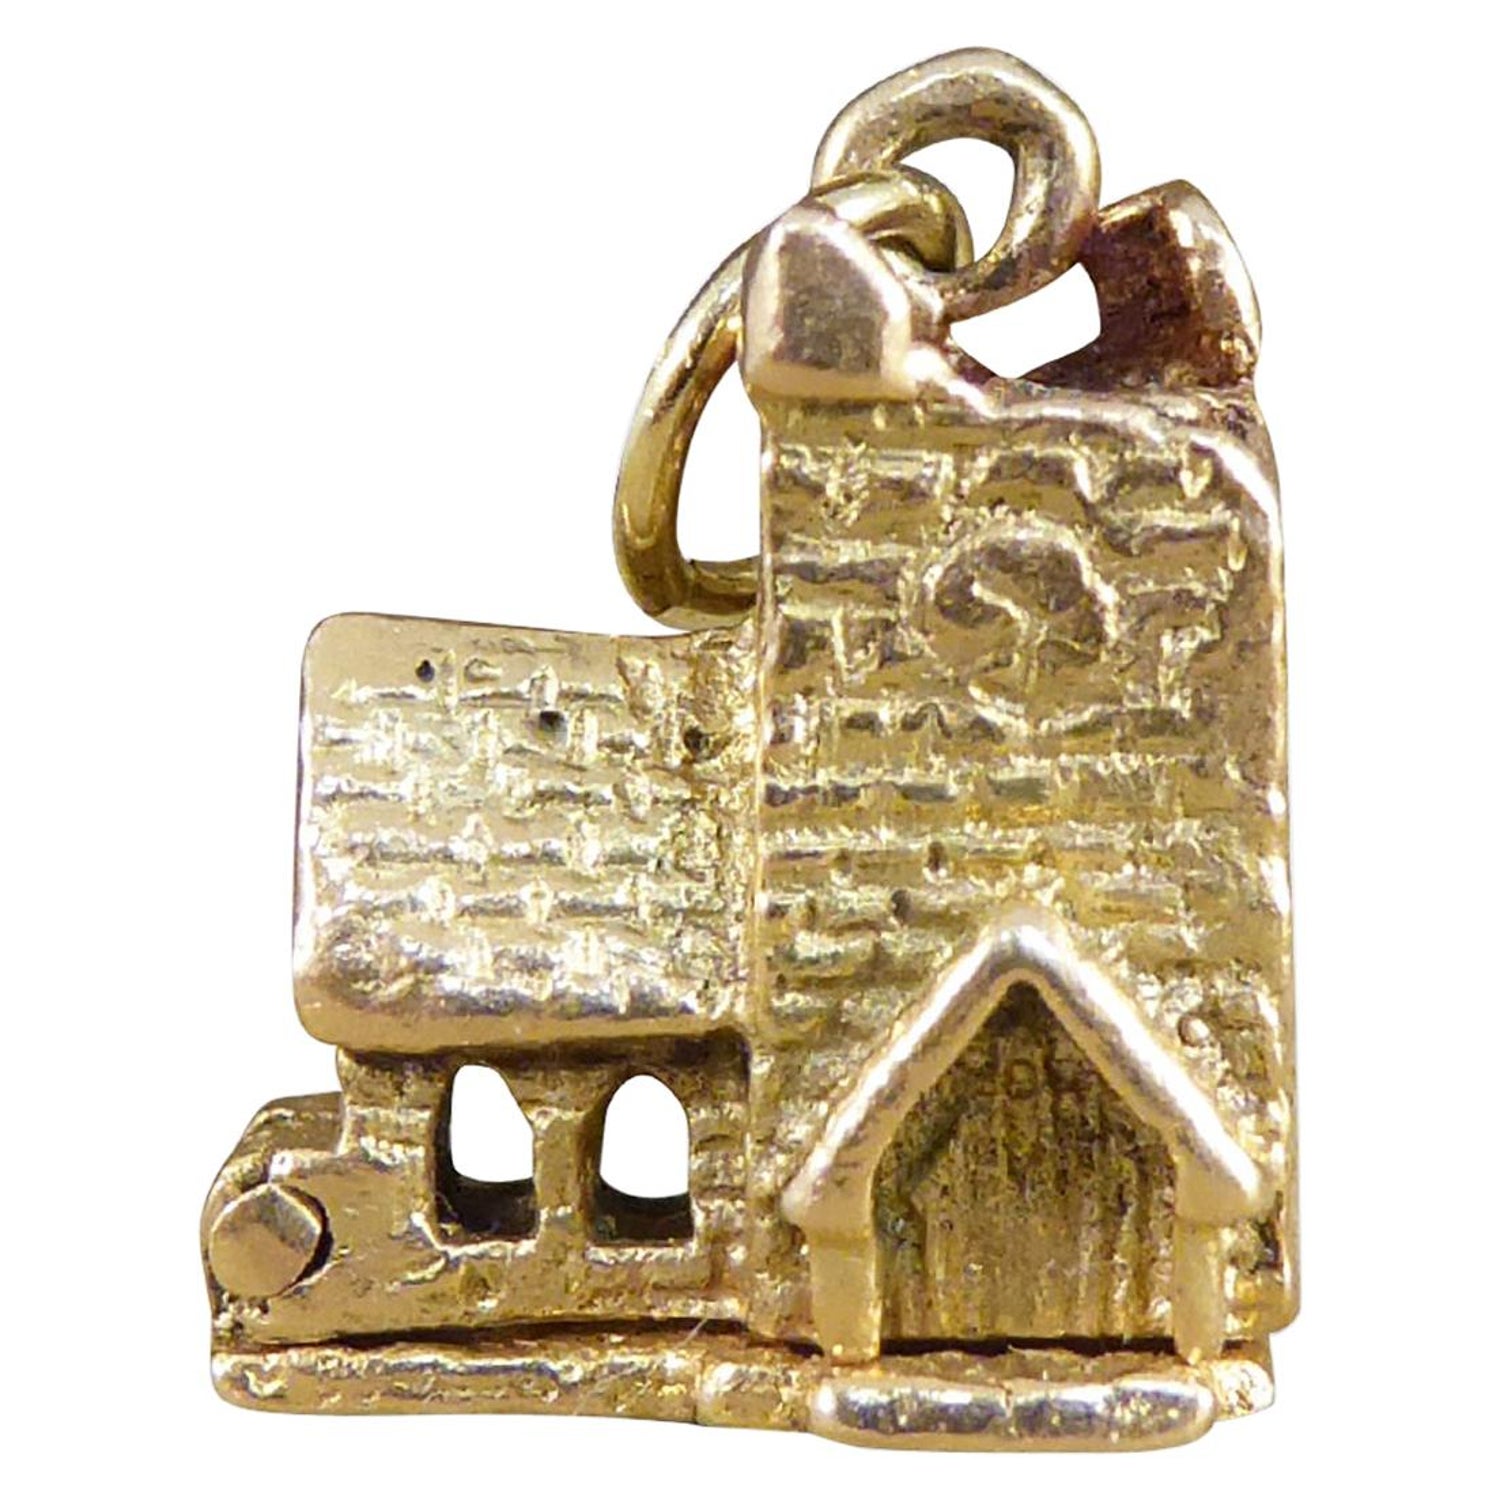 GENUINE SOLID 9ct YELLOW GOLD 3D LARGE VINTAGE KEY GIFT CHARM PENDANT RRP $169